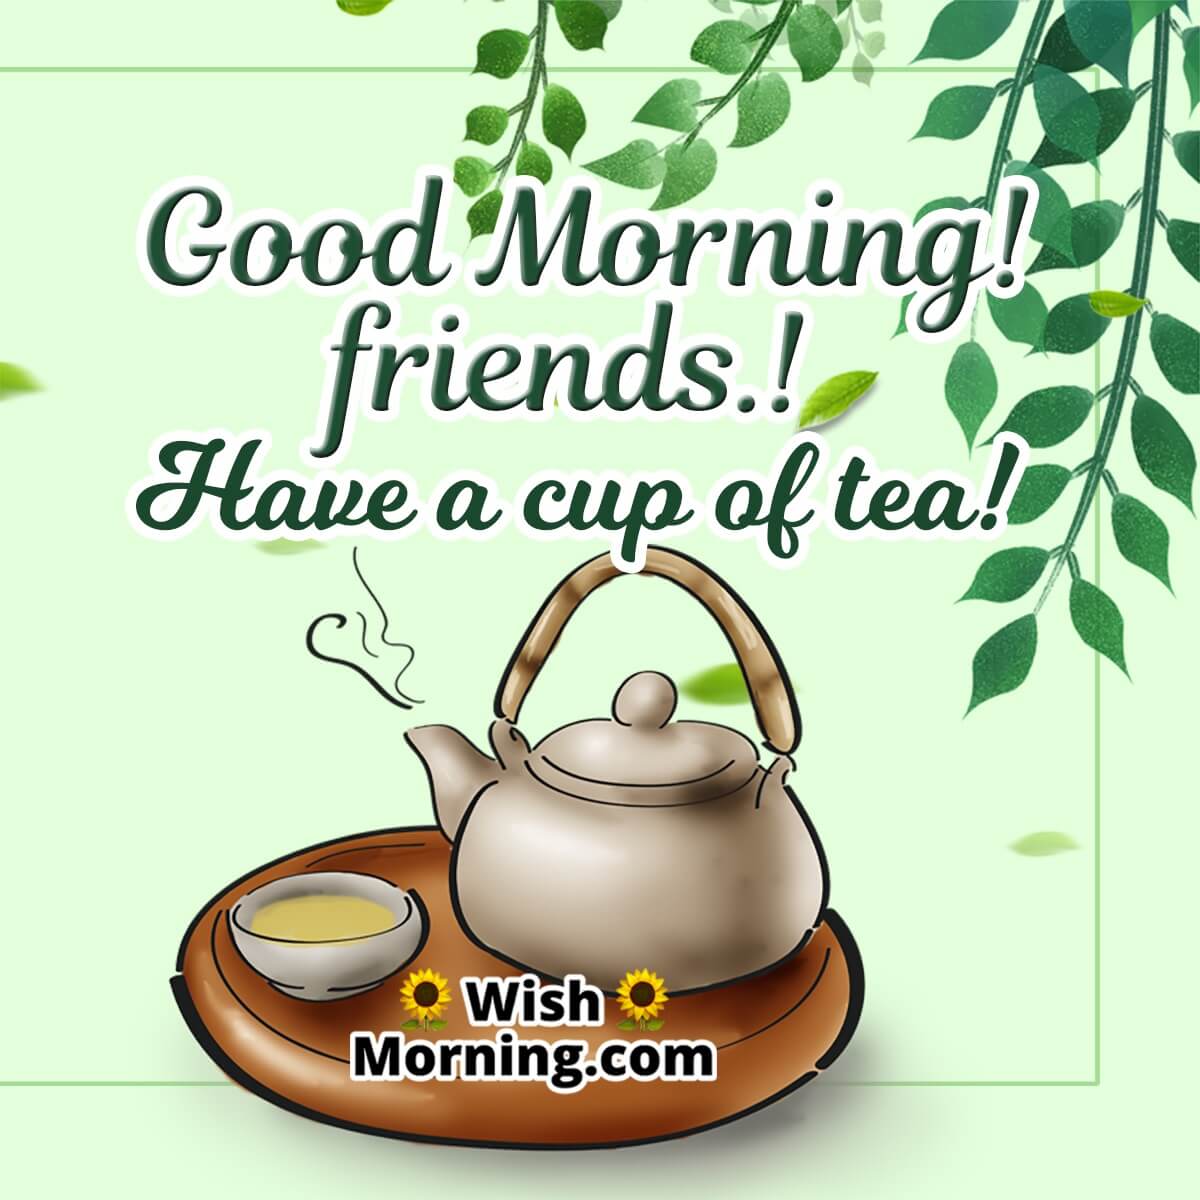 Good Morning Friends.! Have A Cup Of Tea!